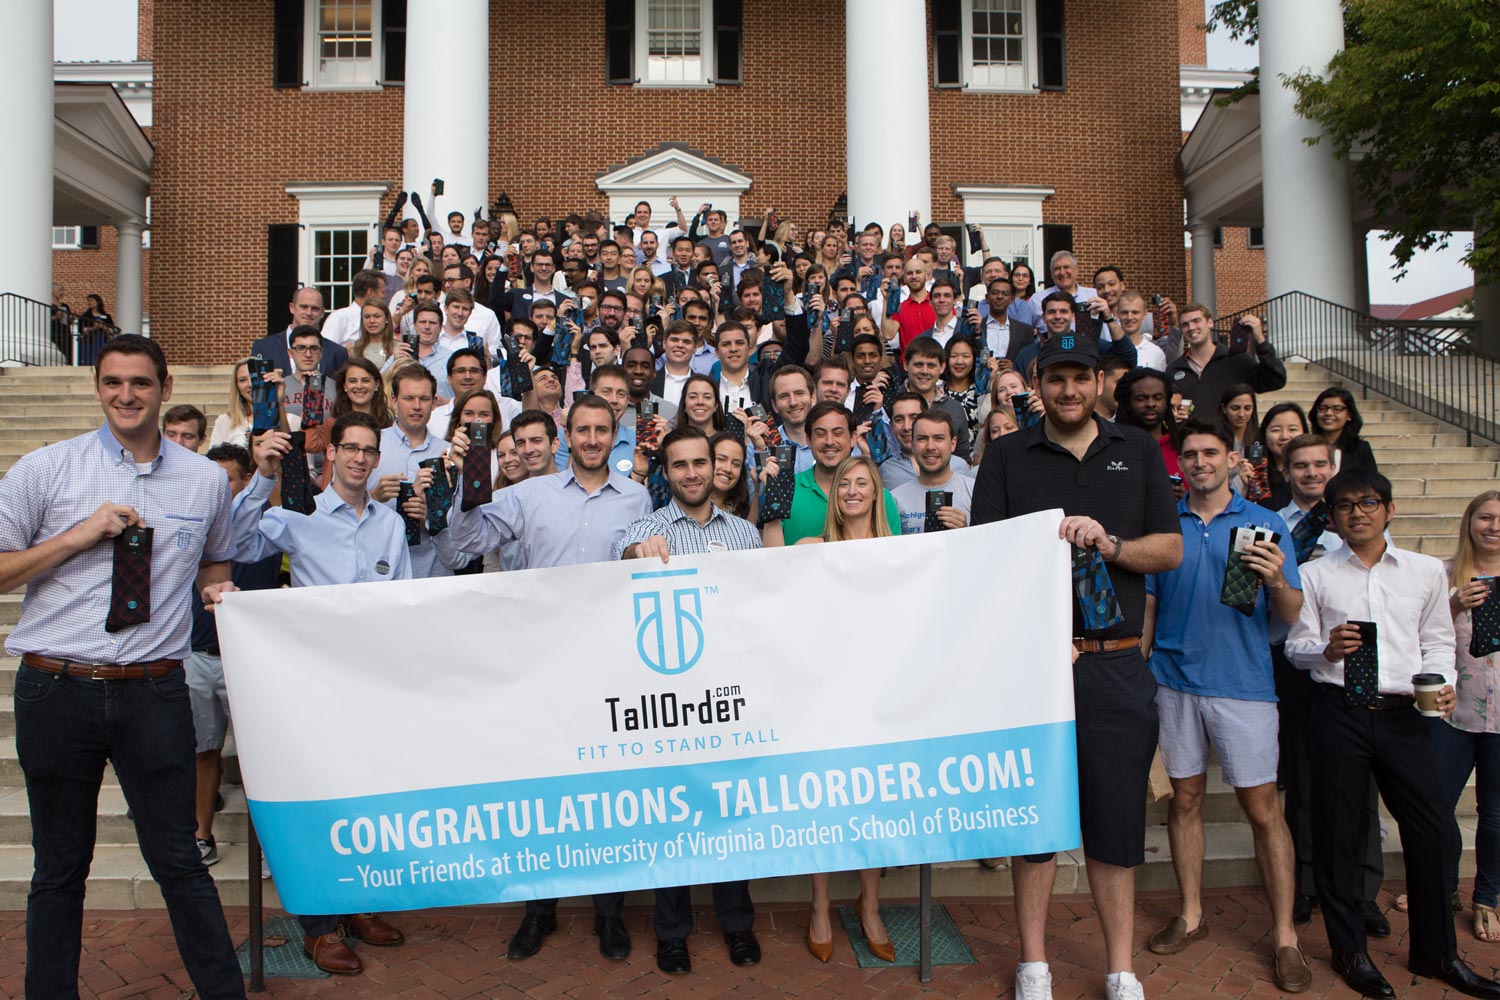 Dan Friedman left, and  Mike, holding the sign that says Congratulations, Tallorder.com! a group of fellow students stand behind them on steps